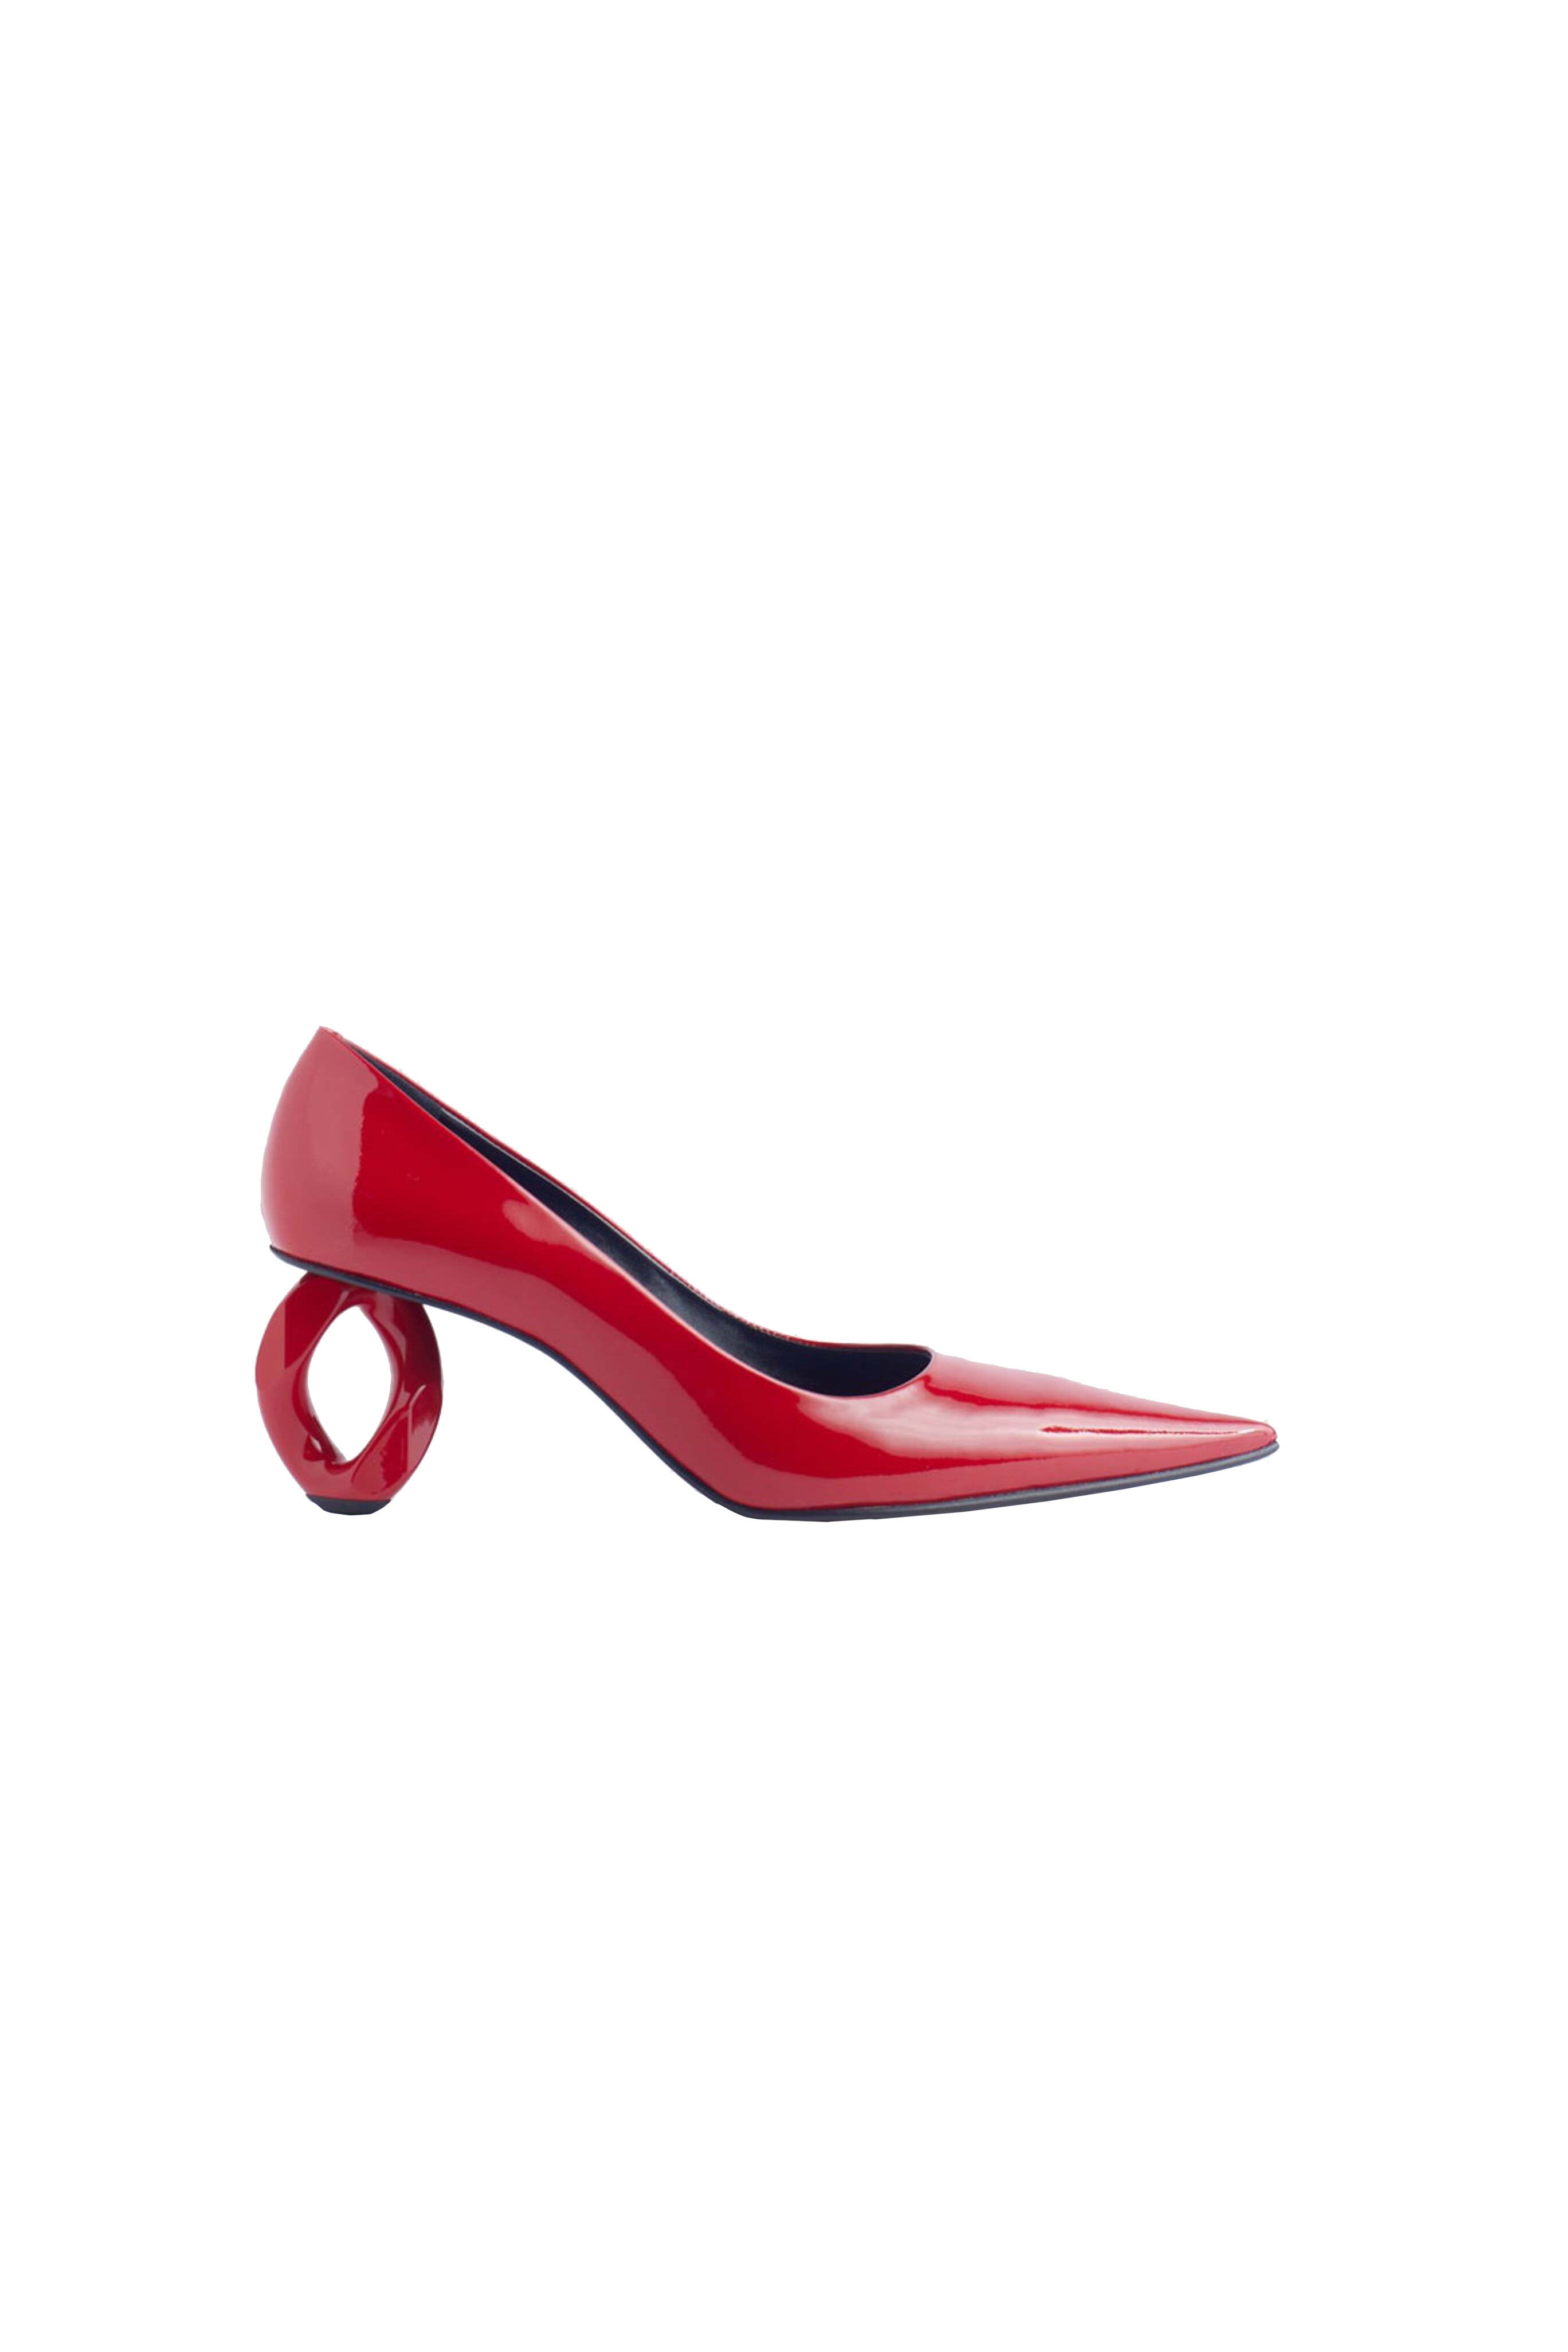 Chain Heel Pump in Red